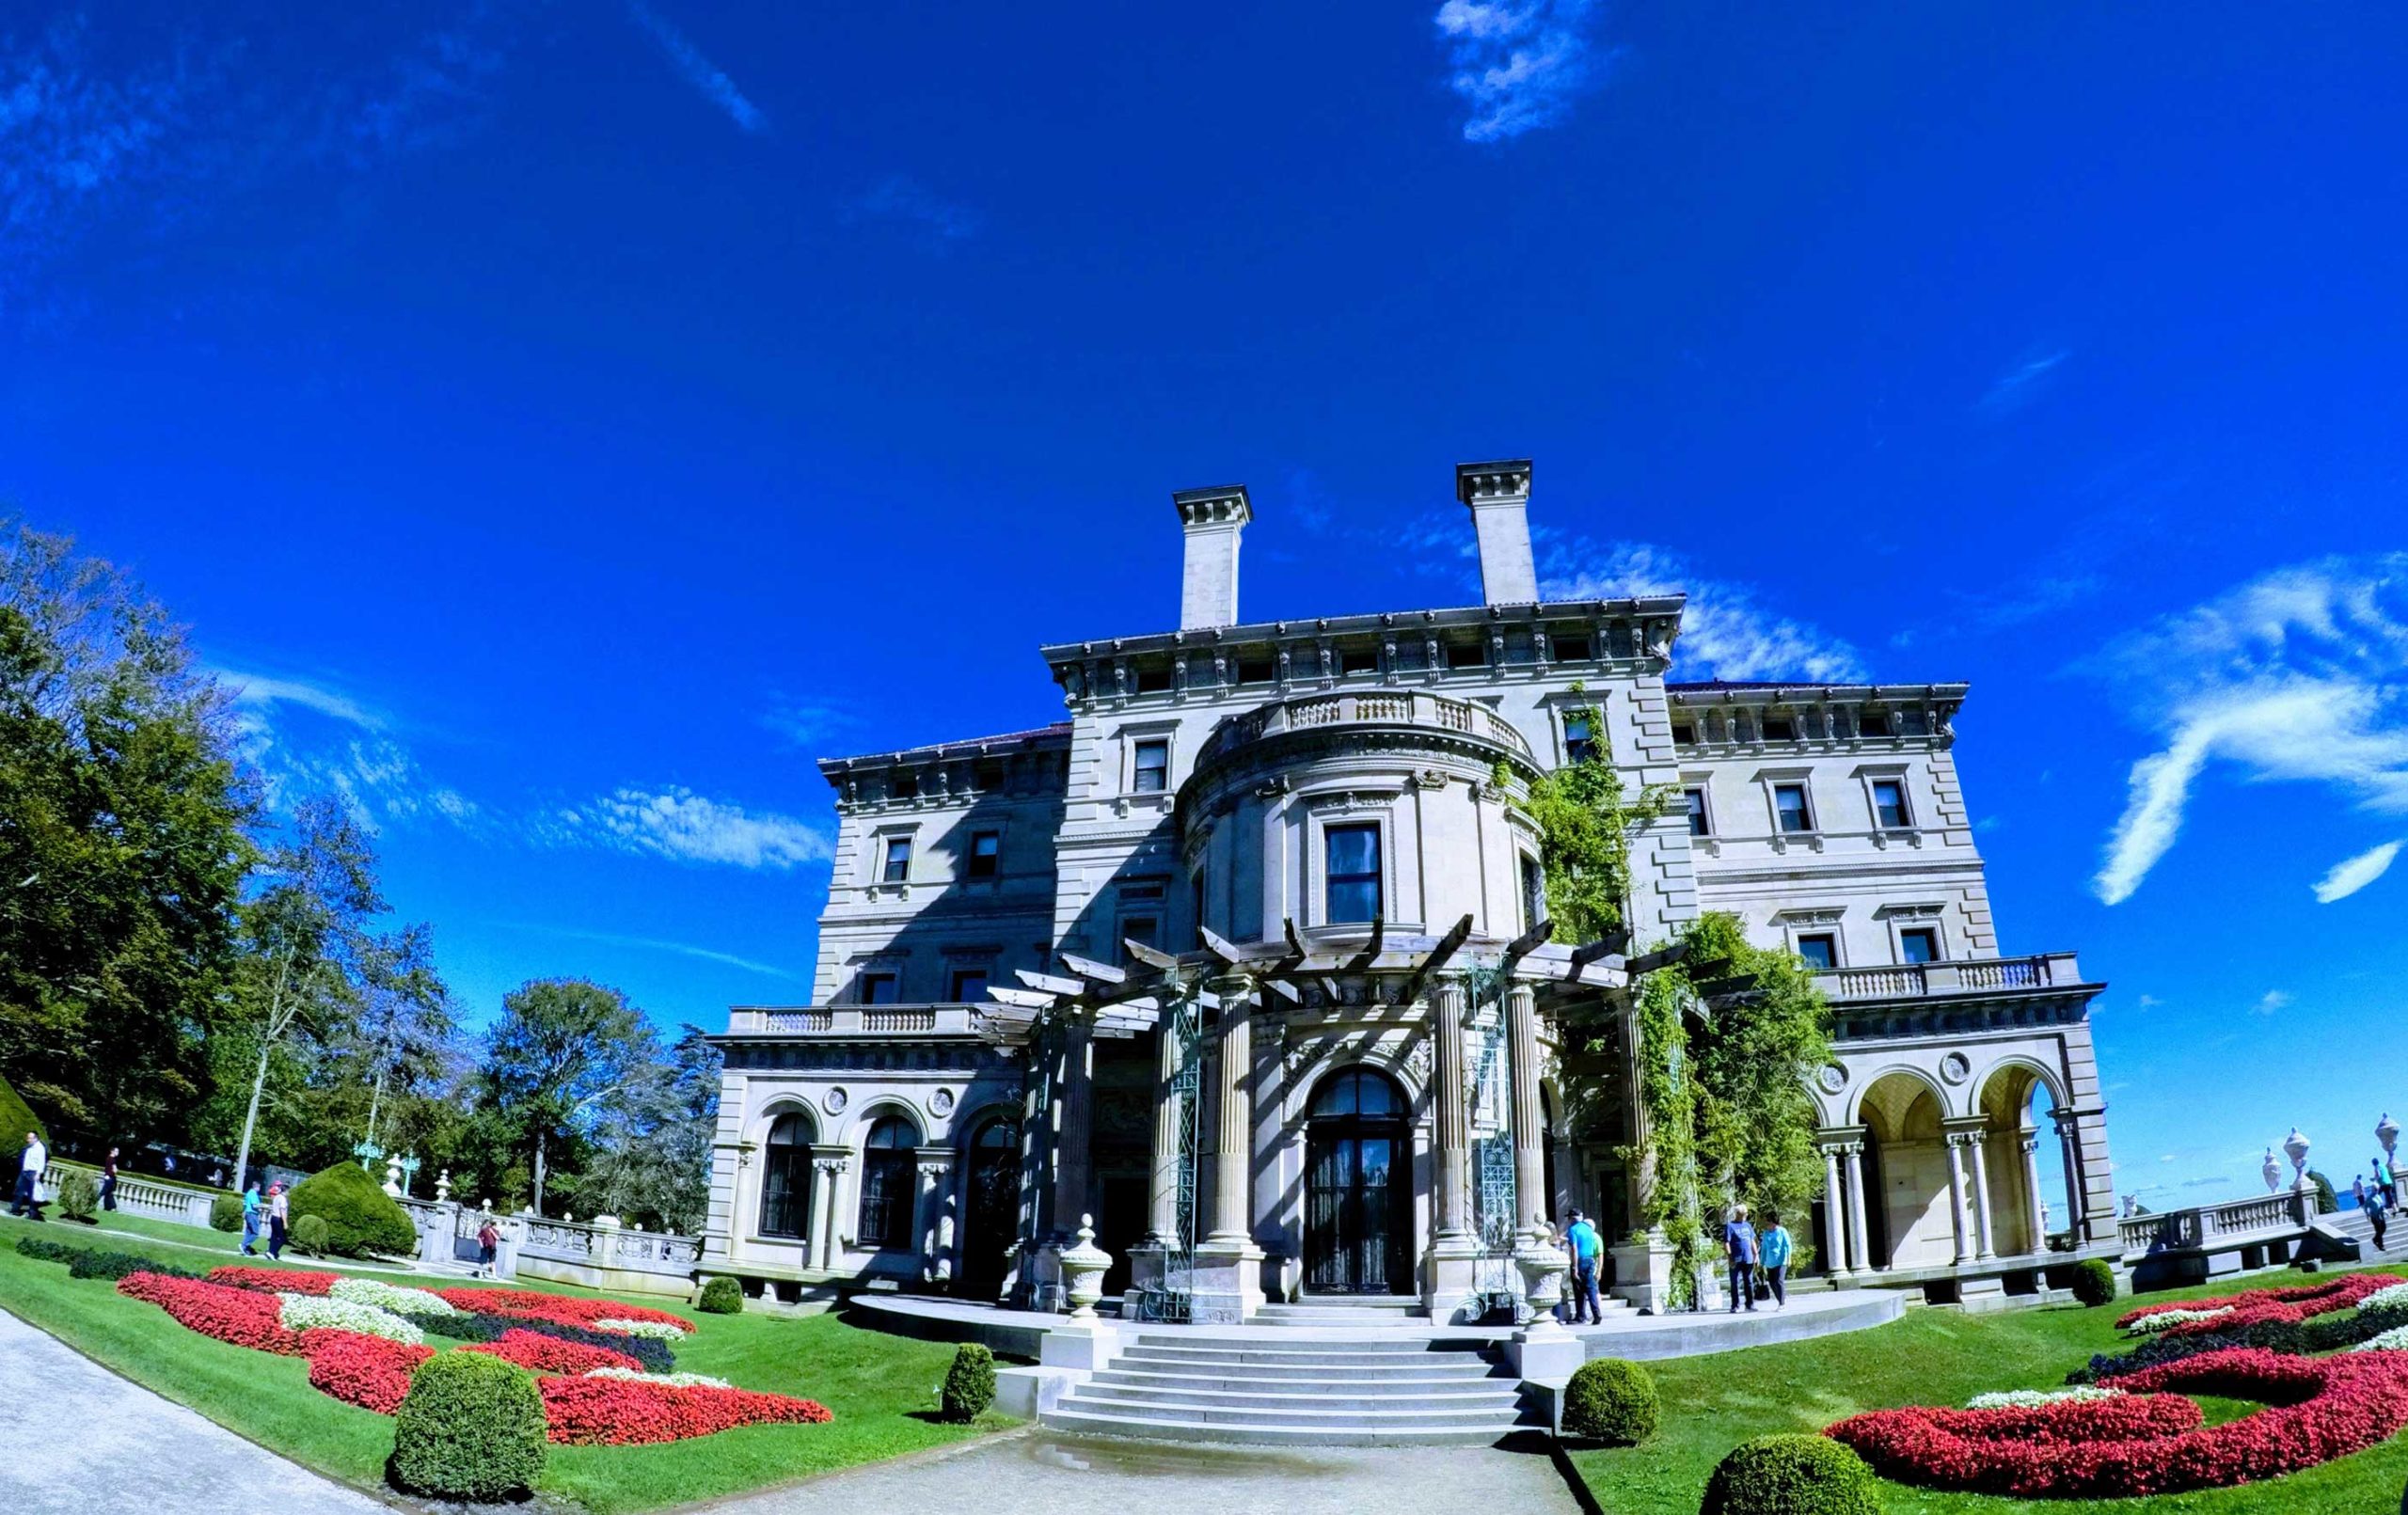 Photograph of a mansion in Newport, Rhode Island